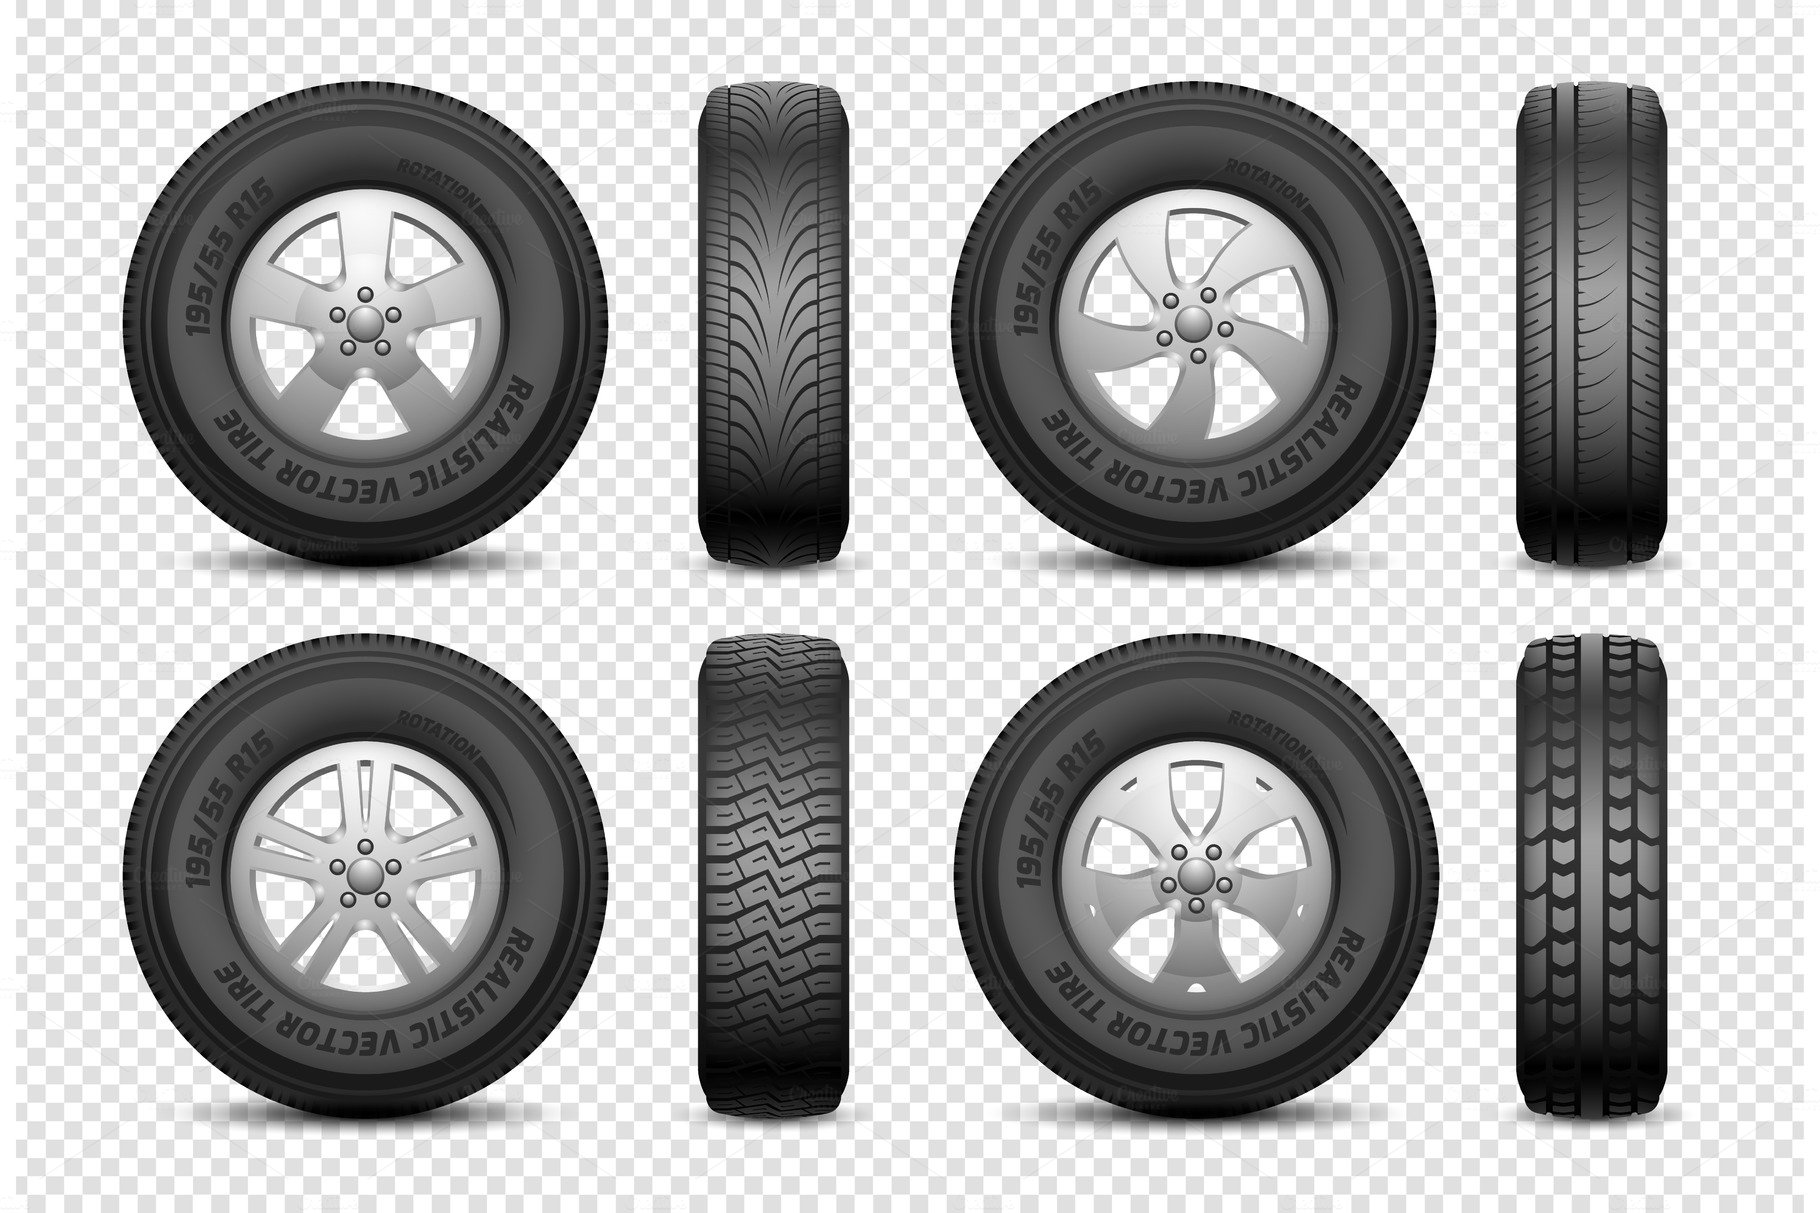 Realistic tires. Isolated car rubber cover image.